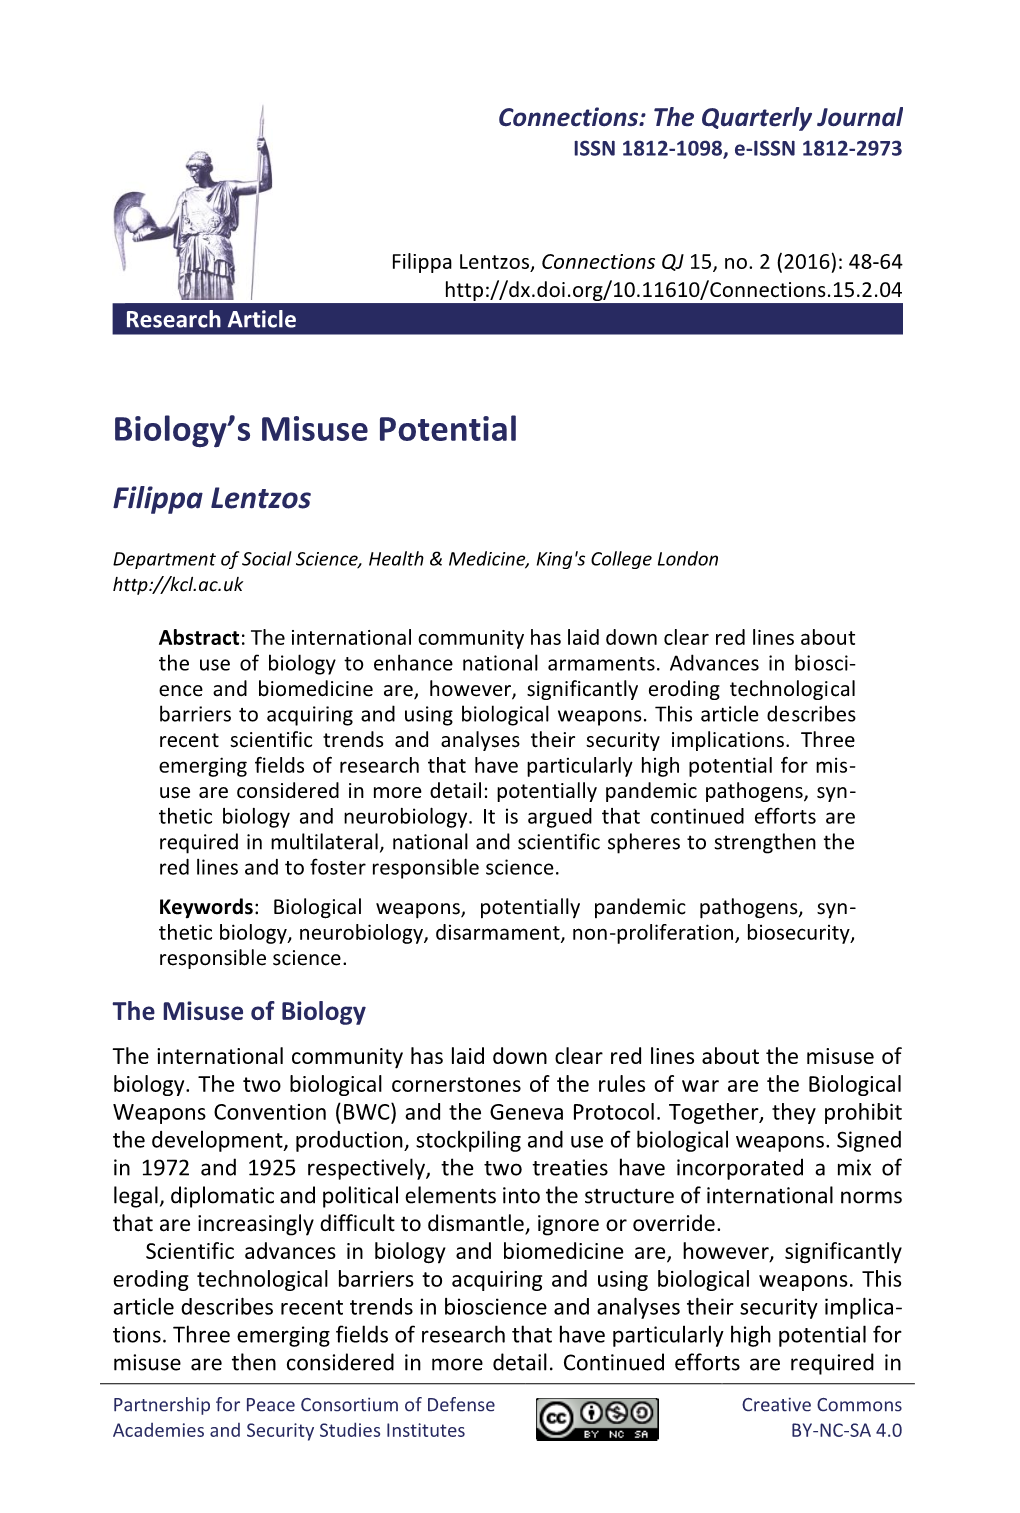 Biology's Misuse Potential